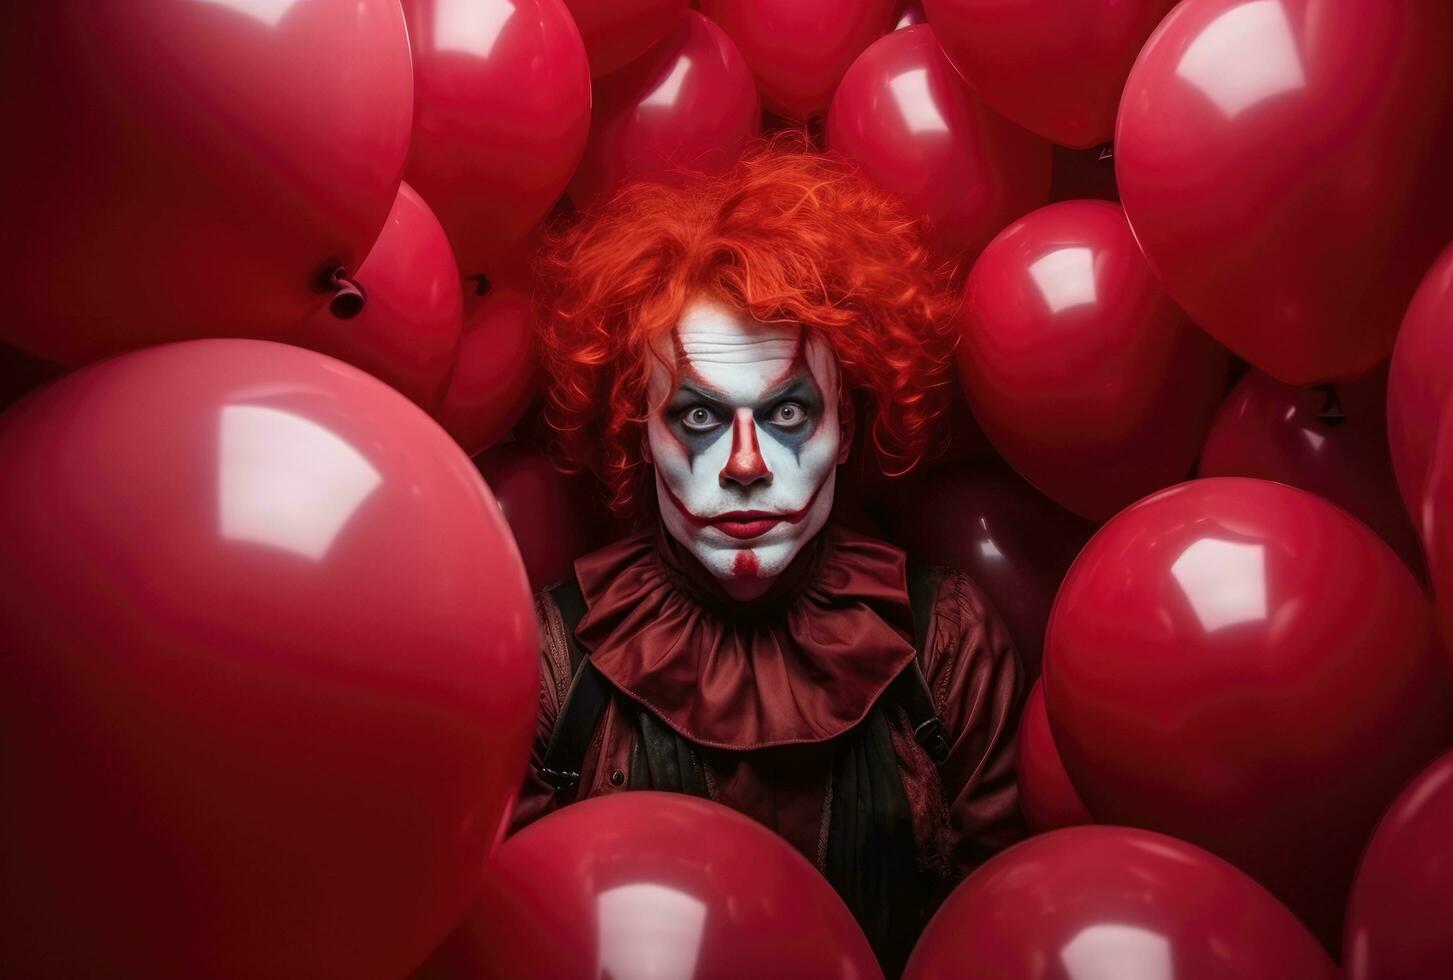 AI generated a clown with hair dyed red poses behind balloons photo